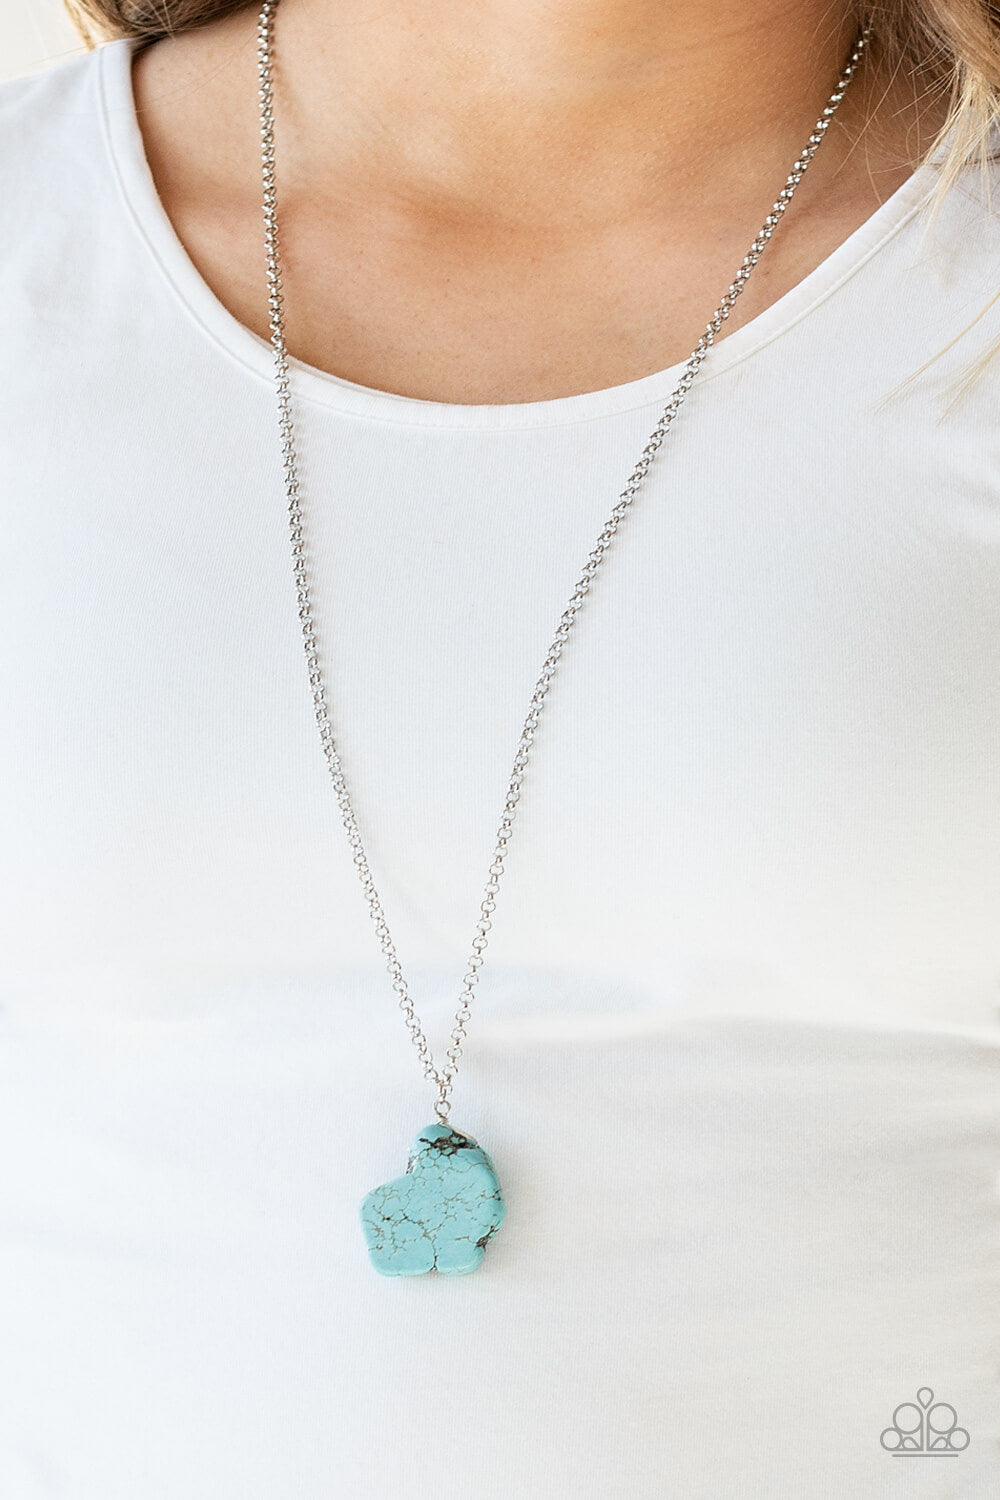 We Will, We Will, Rock You! - Blue Stone Necklace Set - Princess Glam Shop